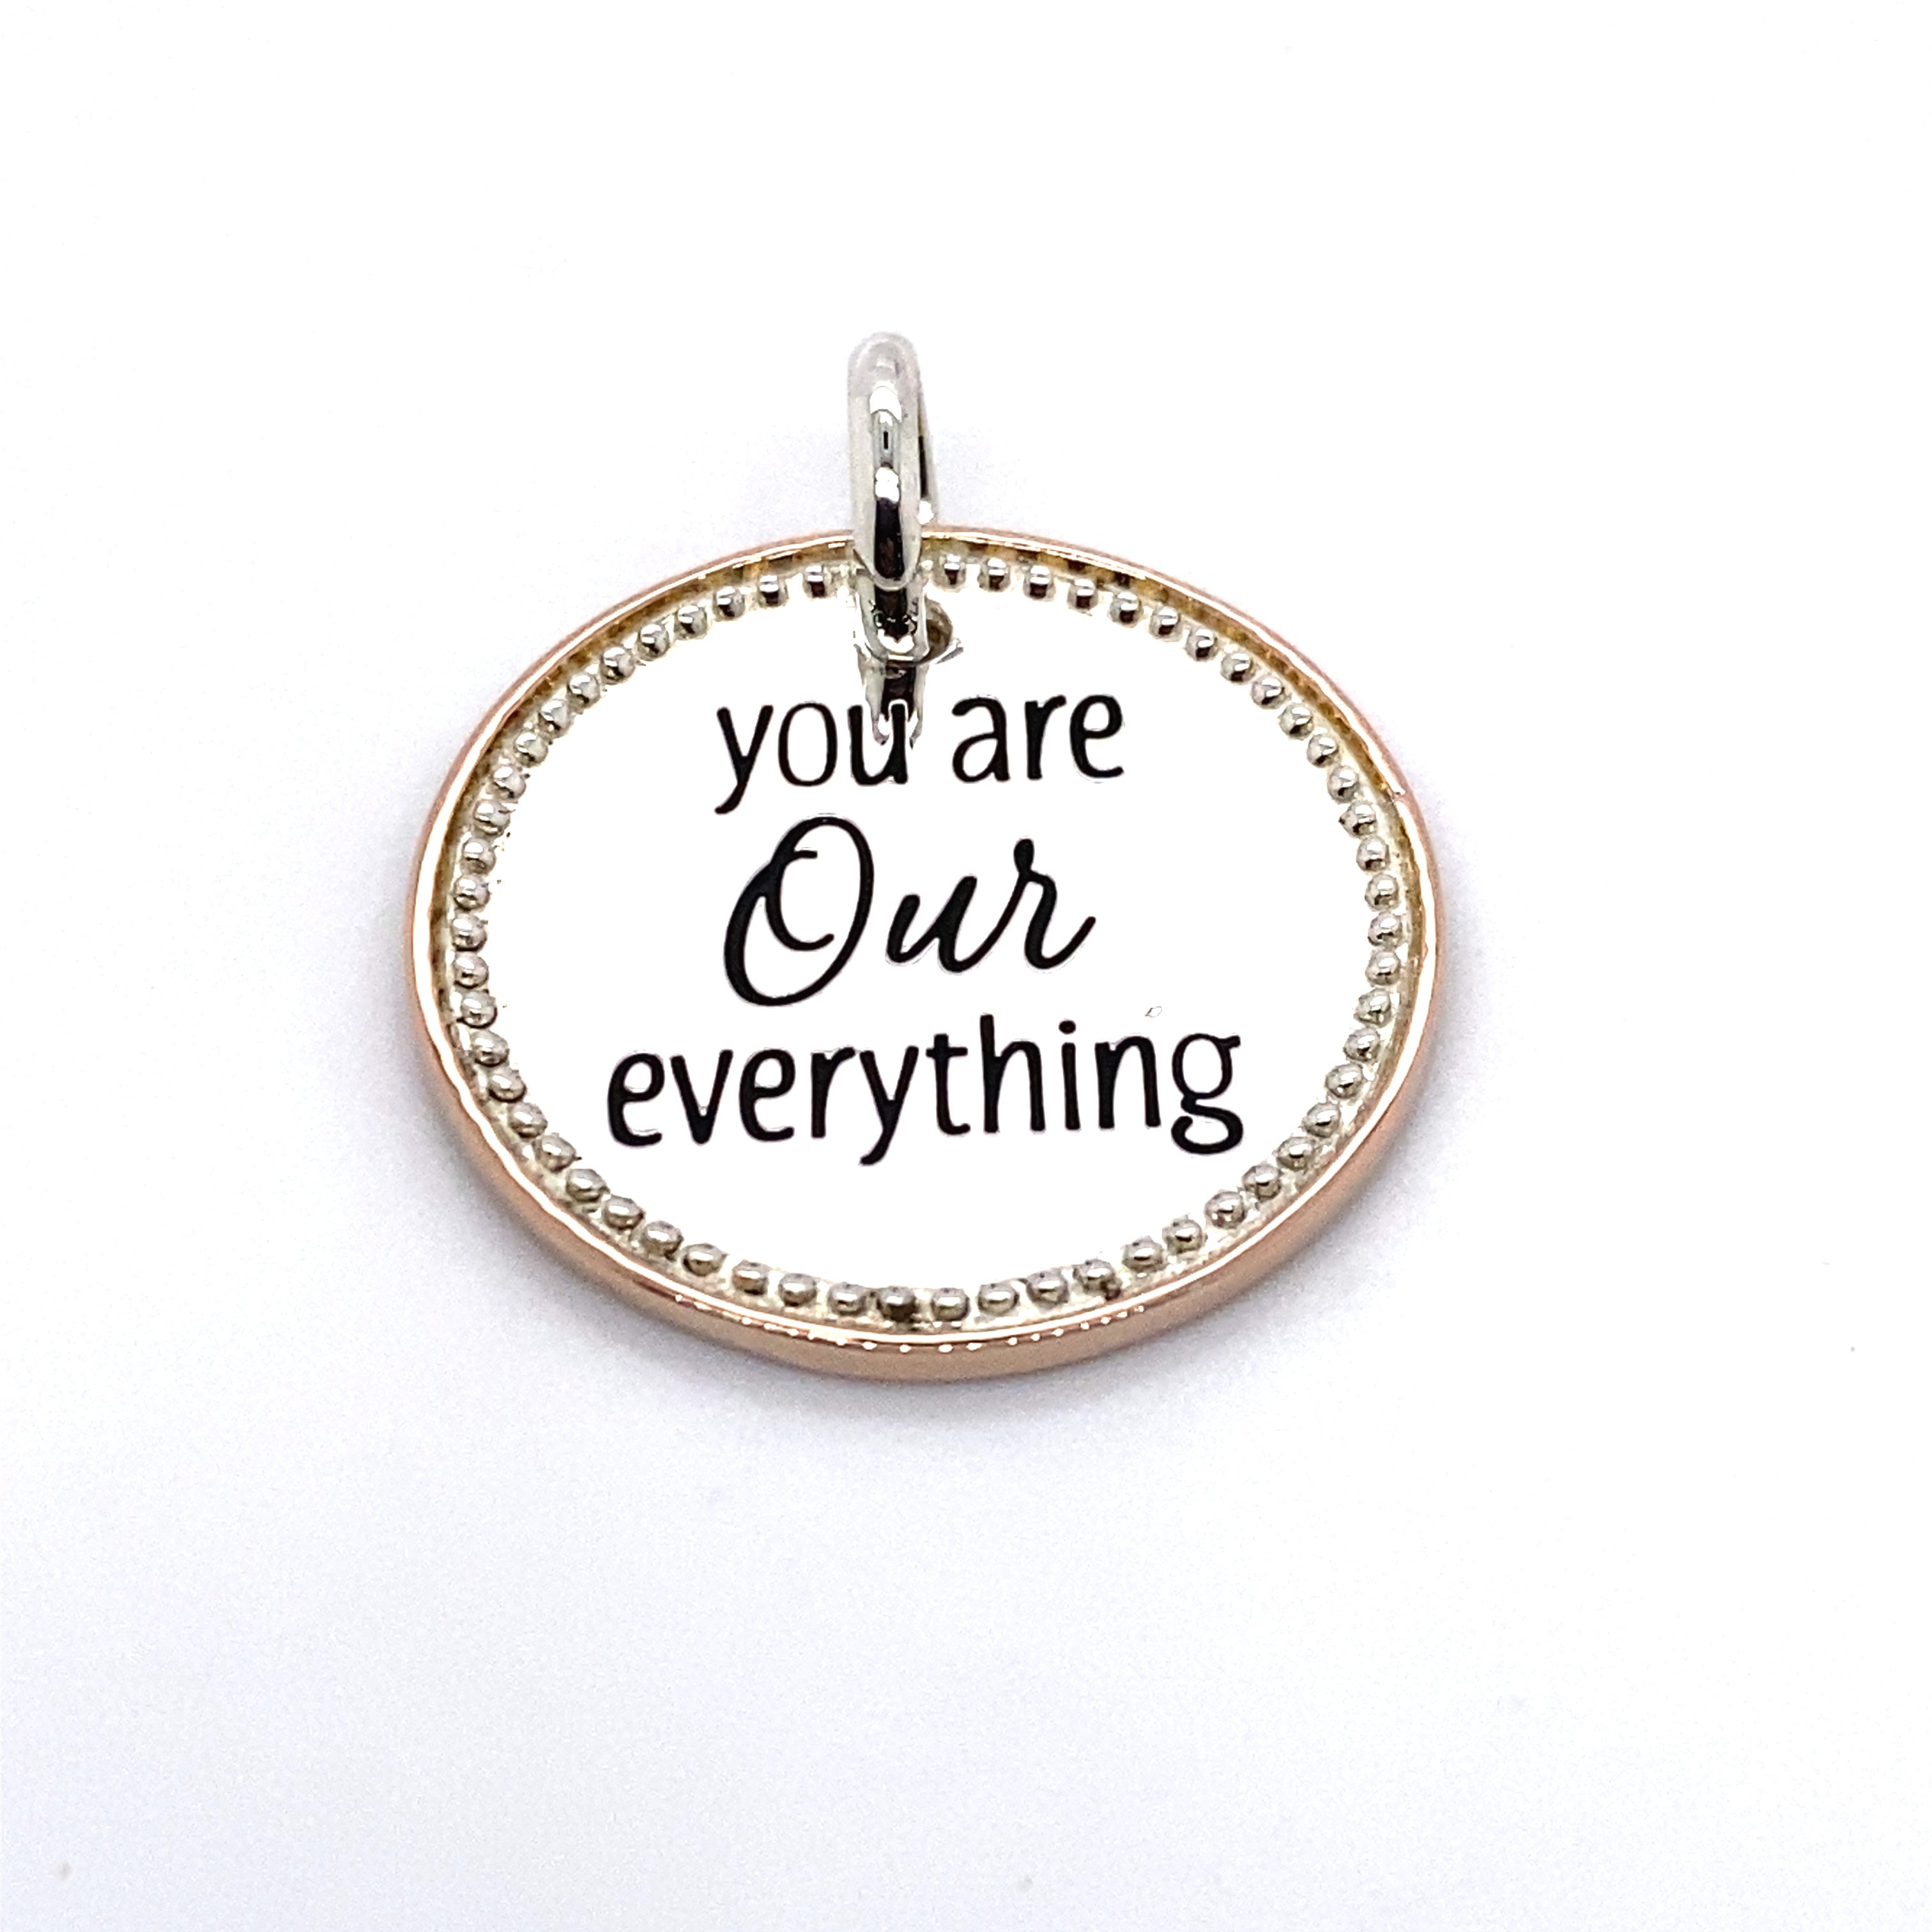 you are our everything pendant charm